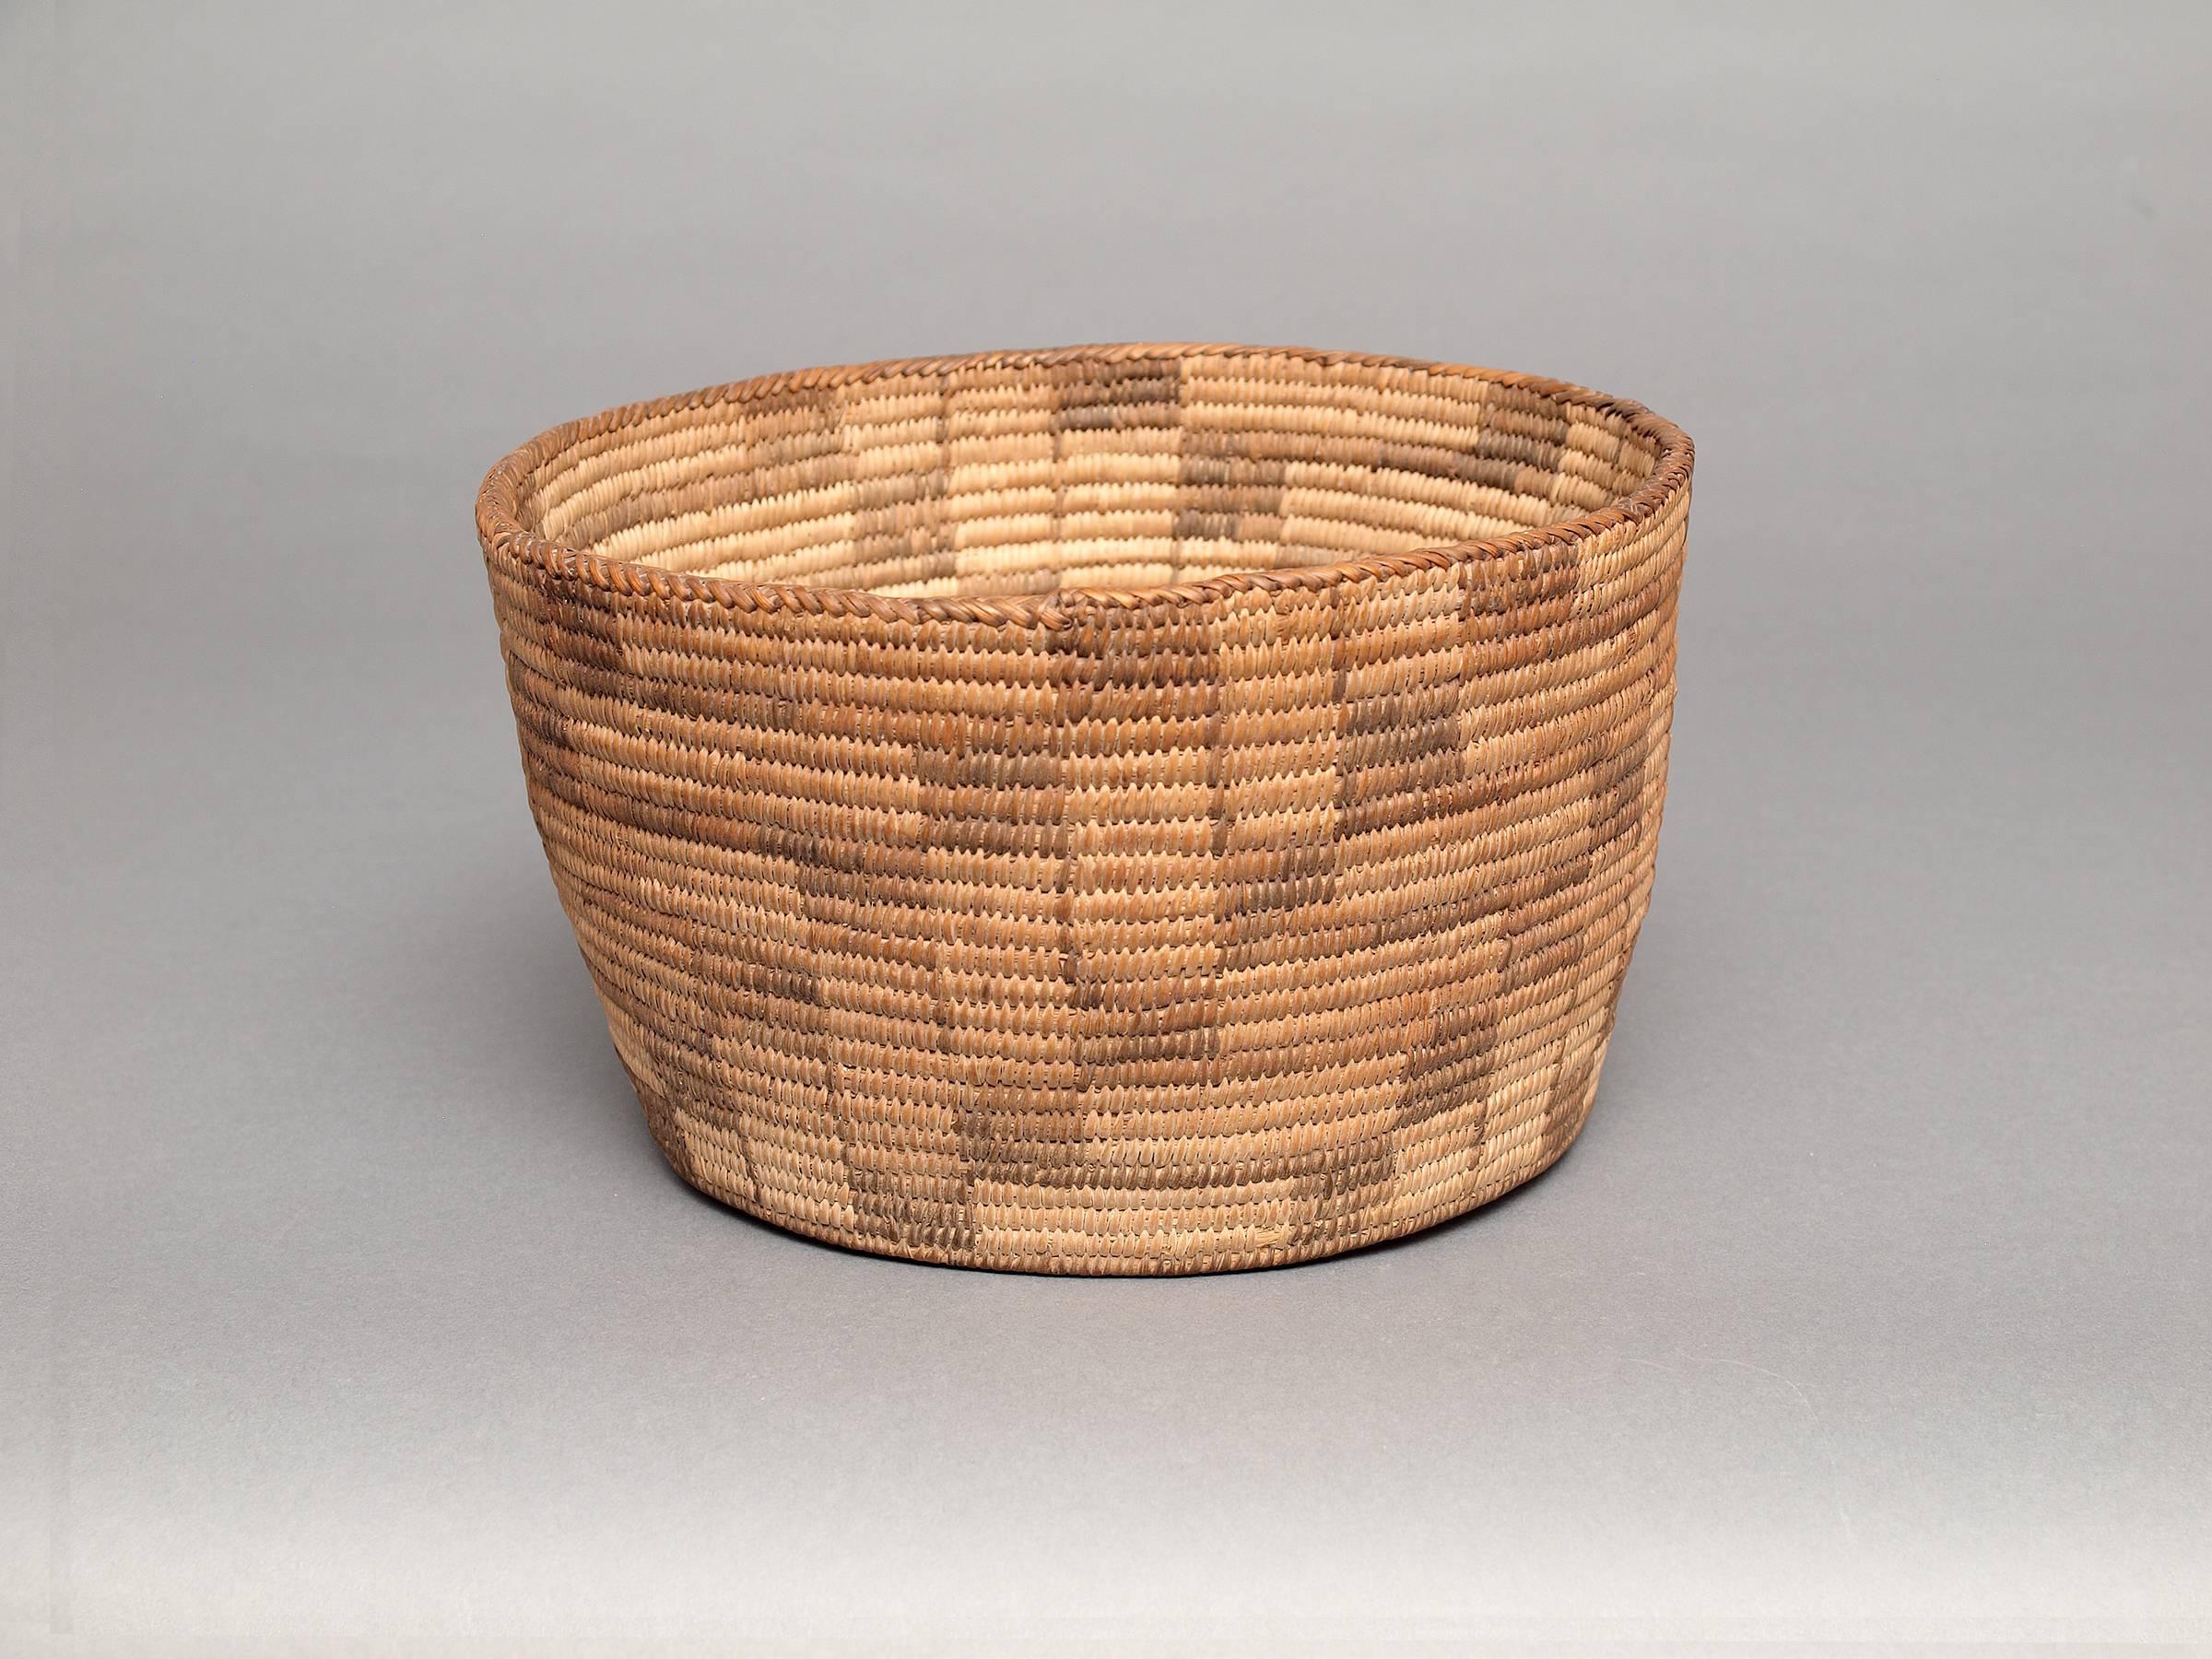 This Tohono O'odham bowl was created in the early part of the 20th century and was expertly woven of natural fibers. 

Expedited and International Shipping is available; please contact us for an estimate.